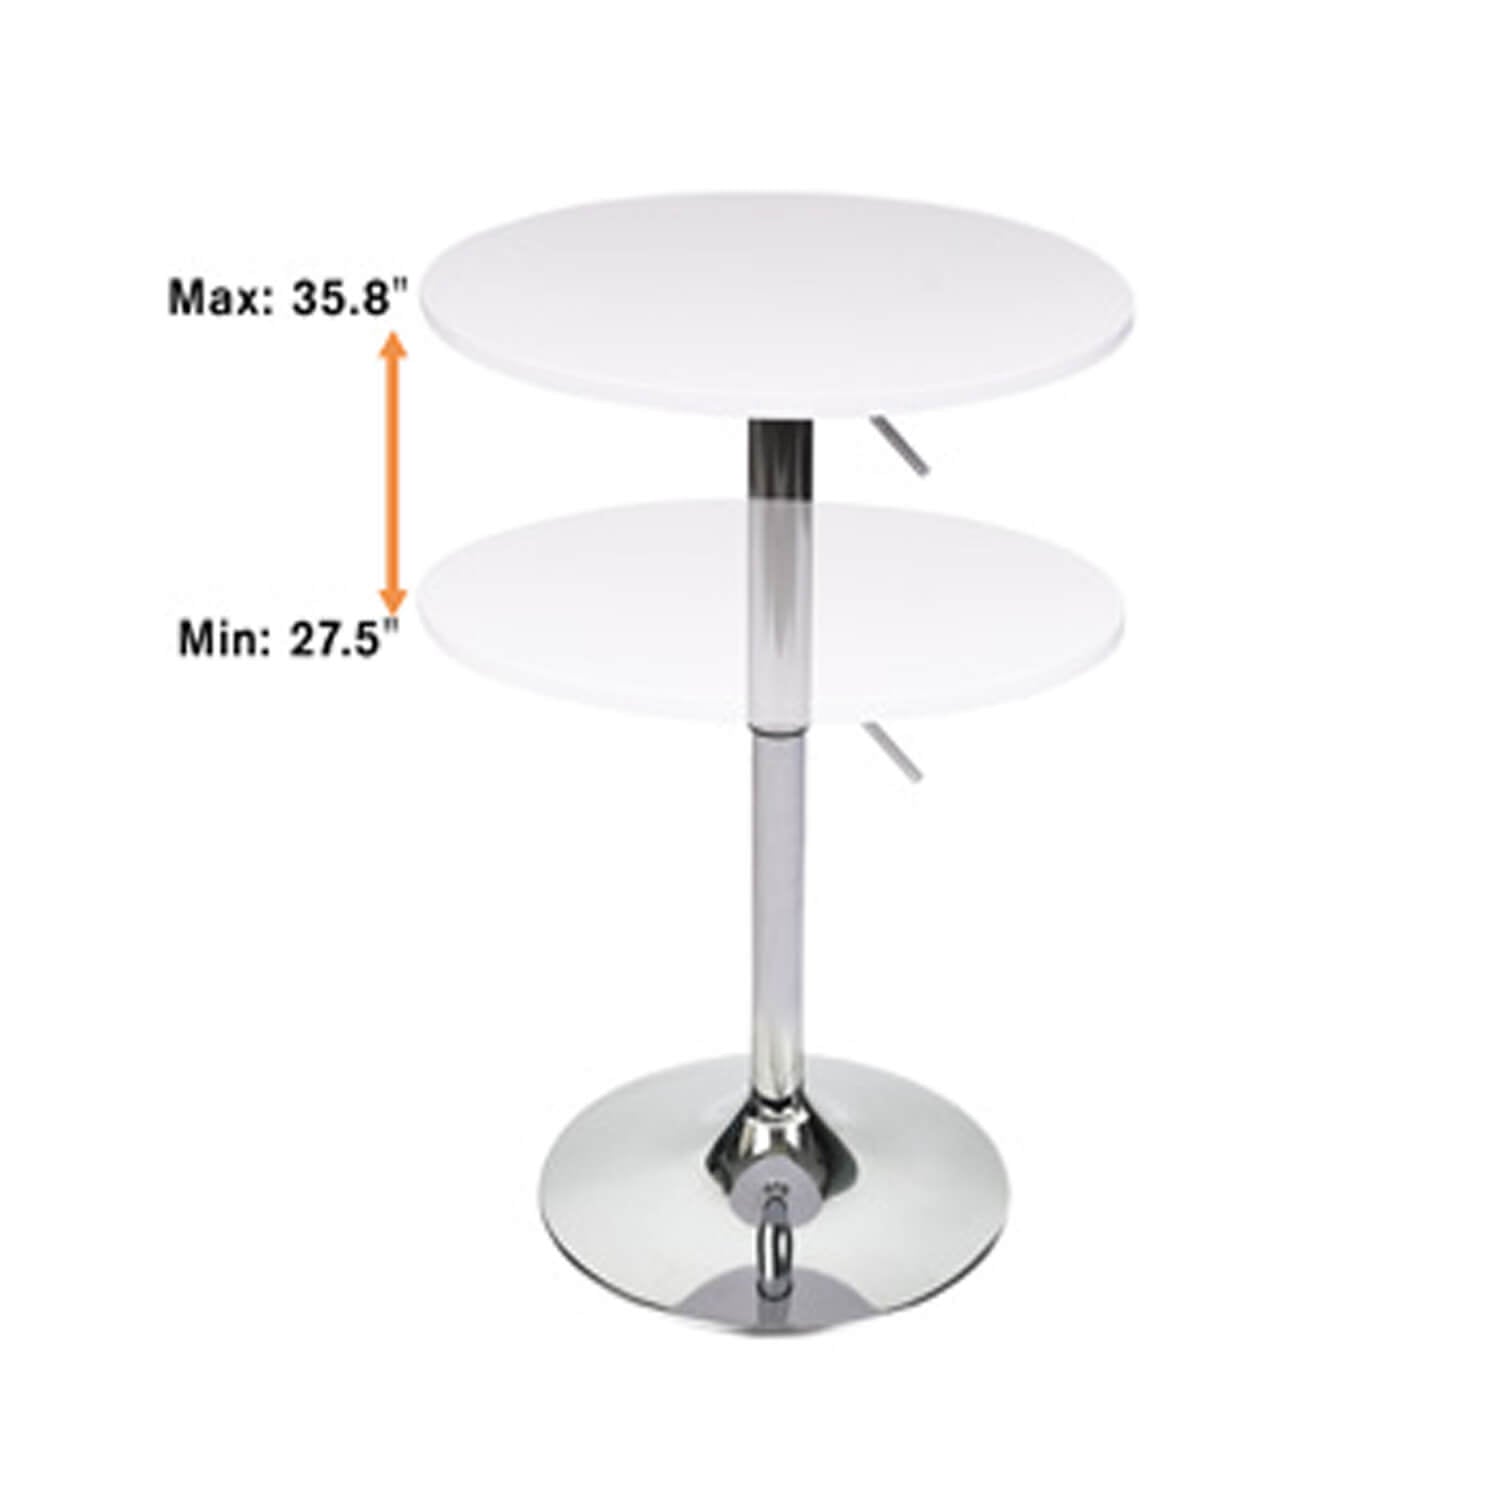 Elecwish white bar table can adjust height